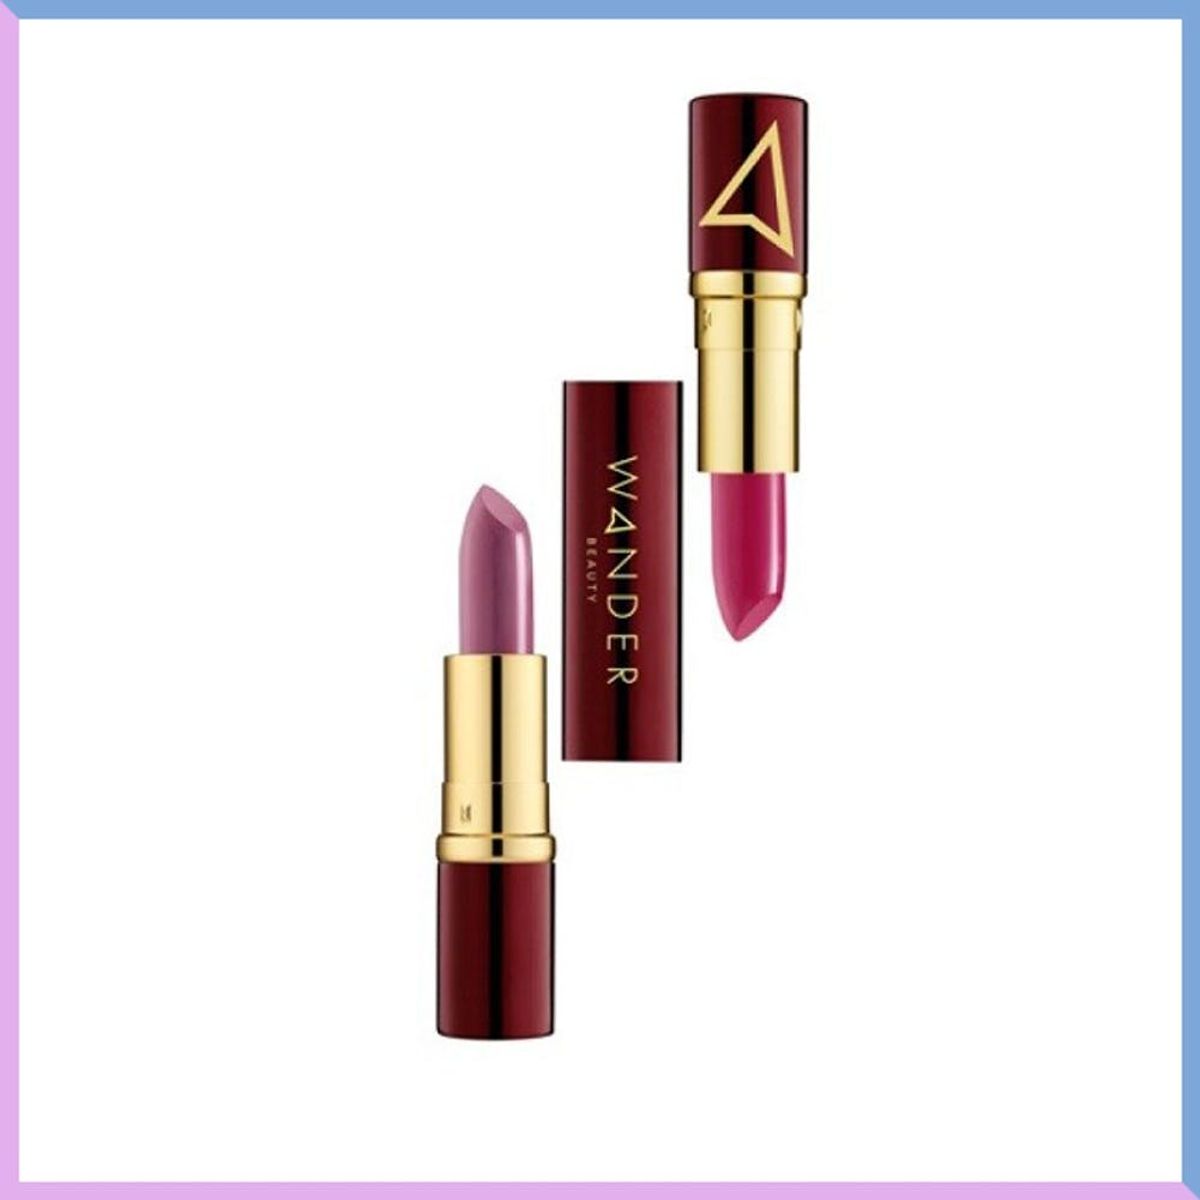 How to Choose the Best Lipstick for Your Zodiac Sign